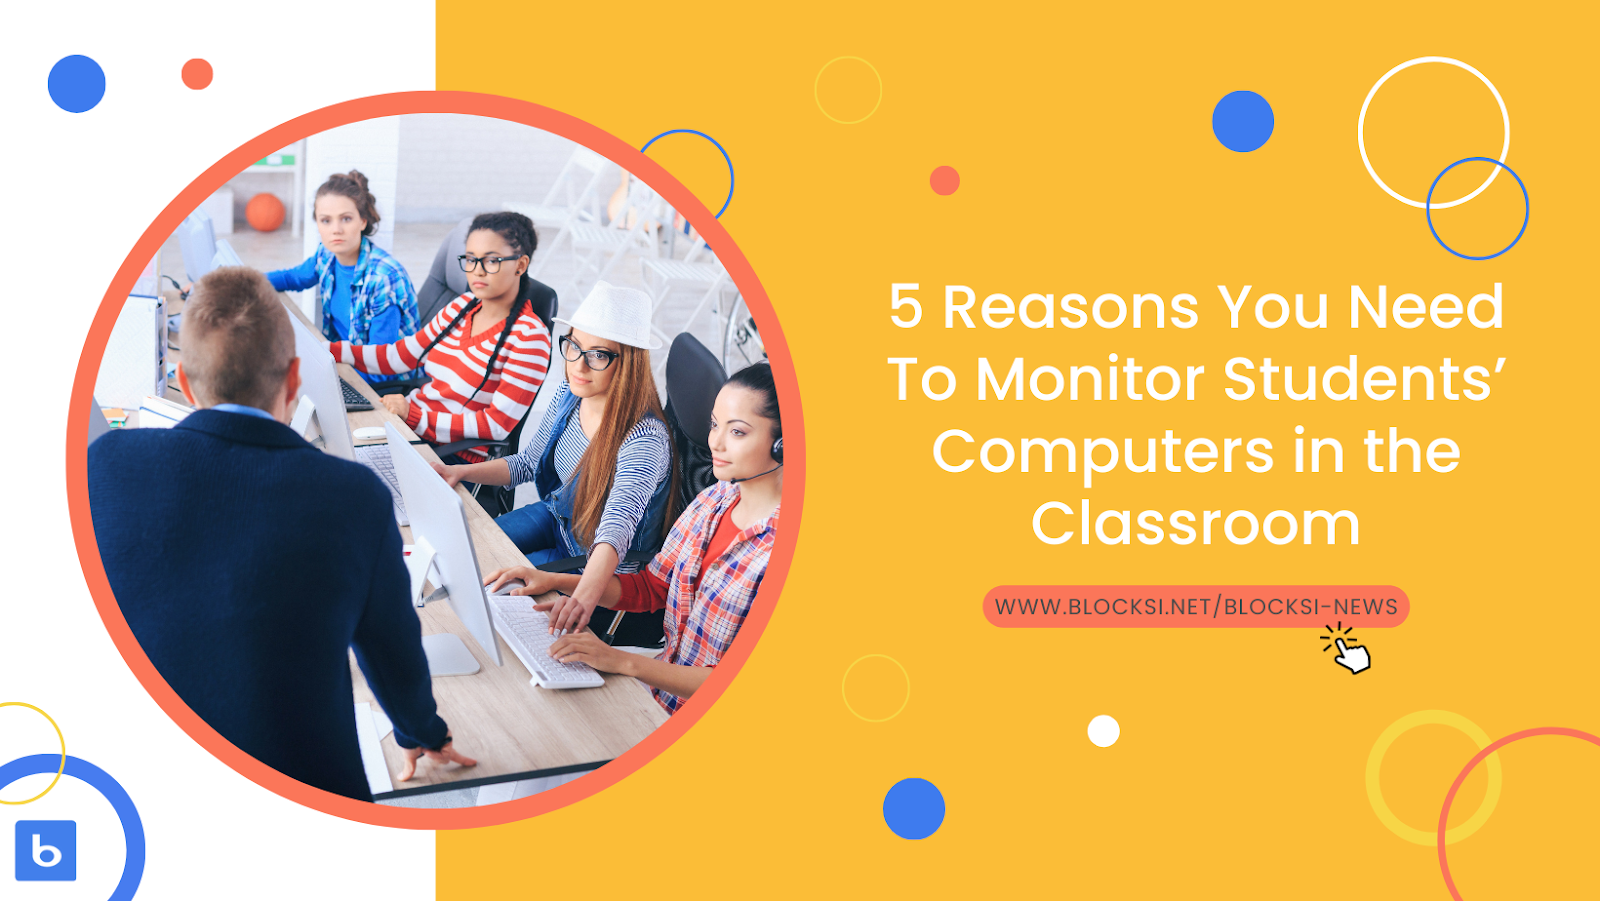 5 Reasons you need to monitor students' computers in the classroom